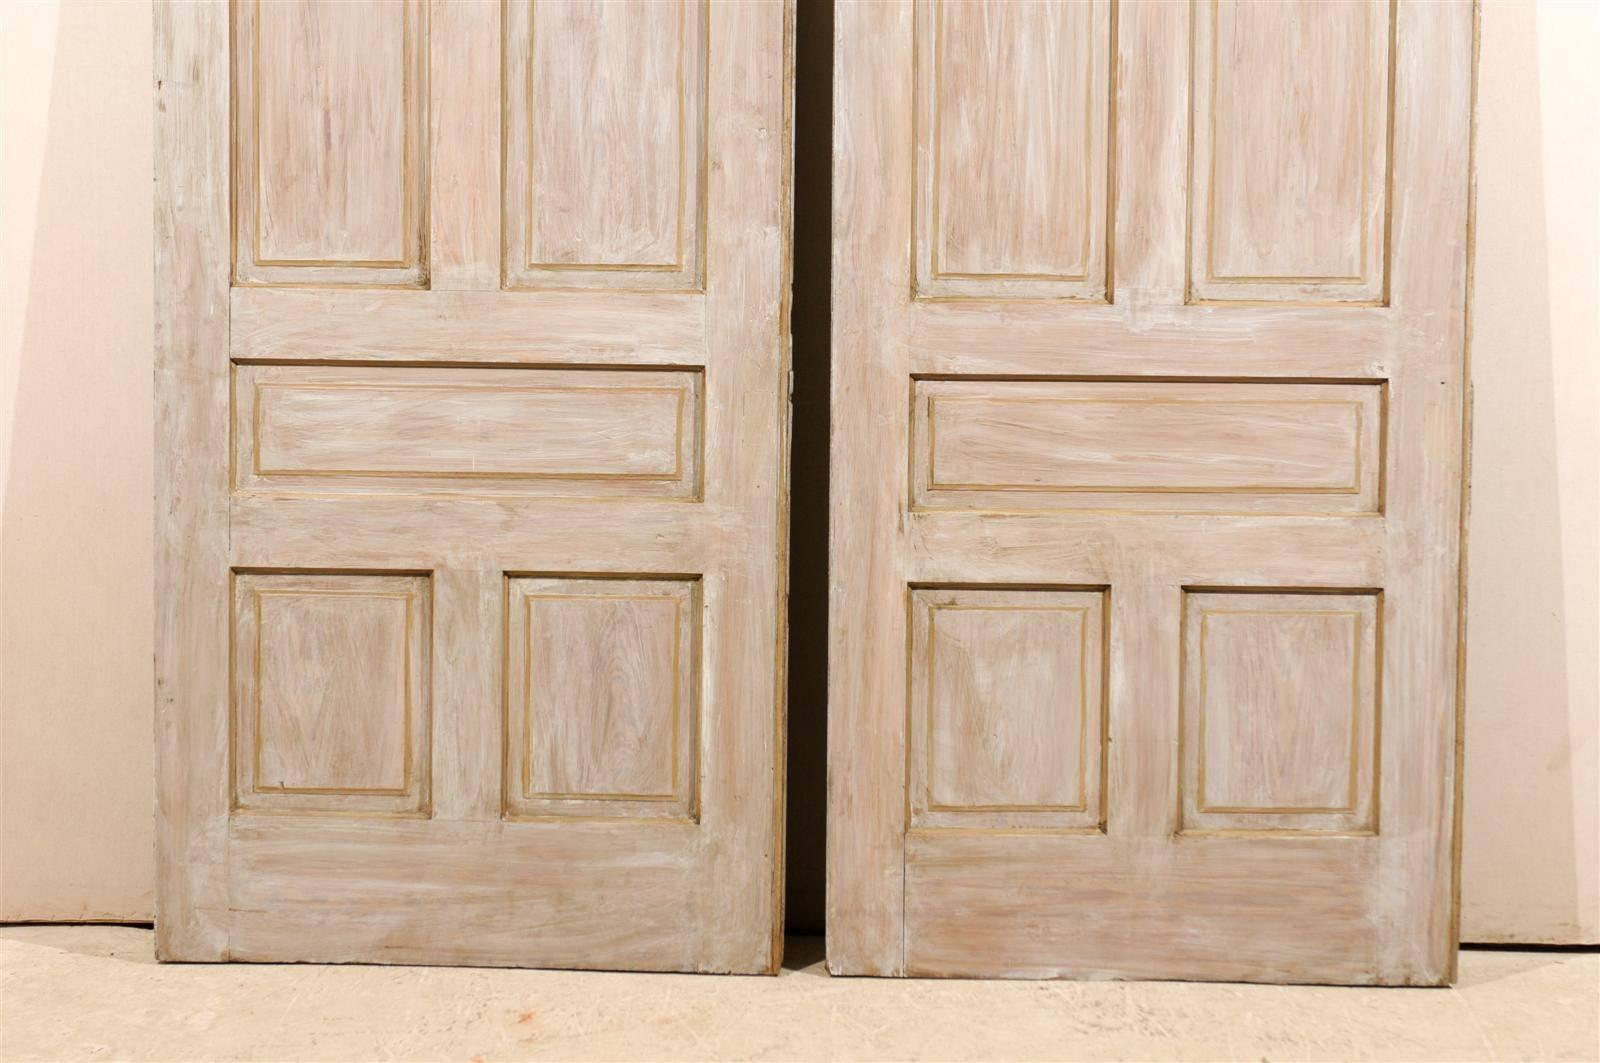 20th Century Pair of Early 20th C. Painted Wood 5-Panel Pocket Doors, with Original Hardware For Sale